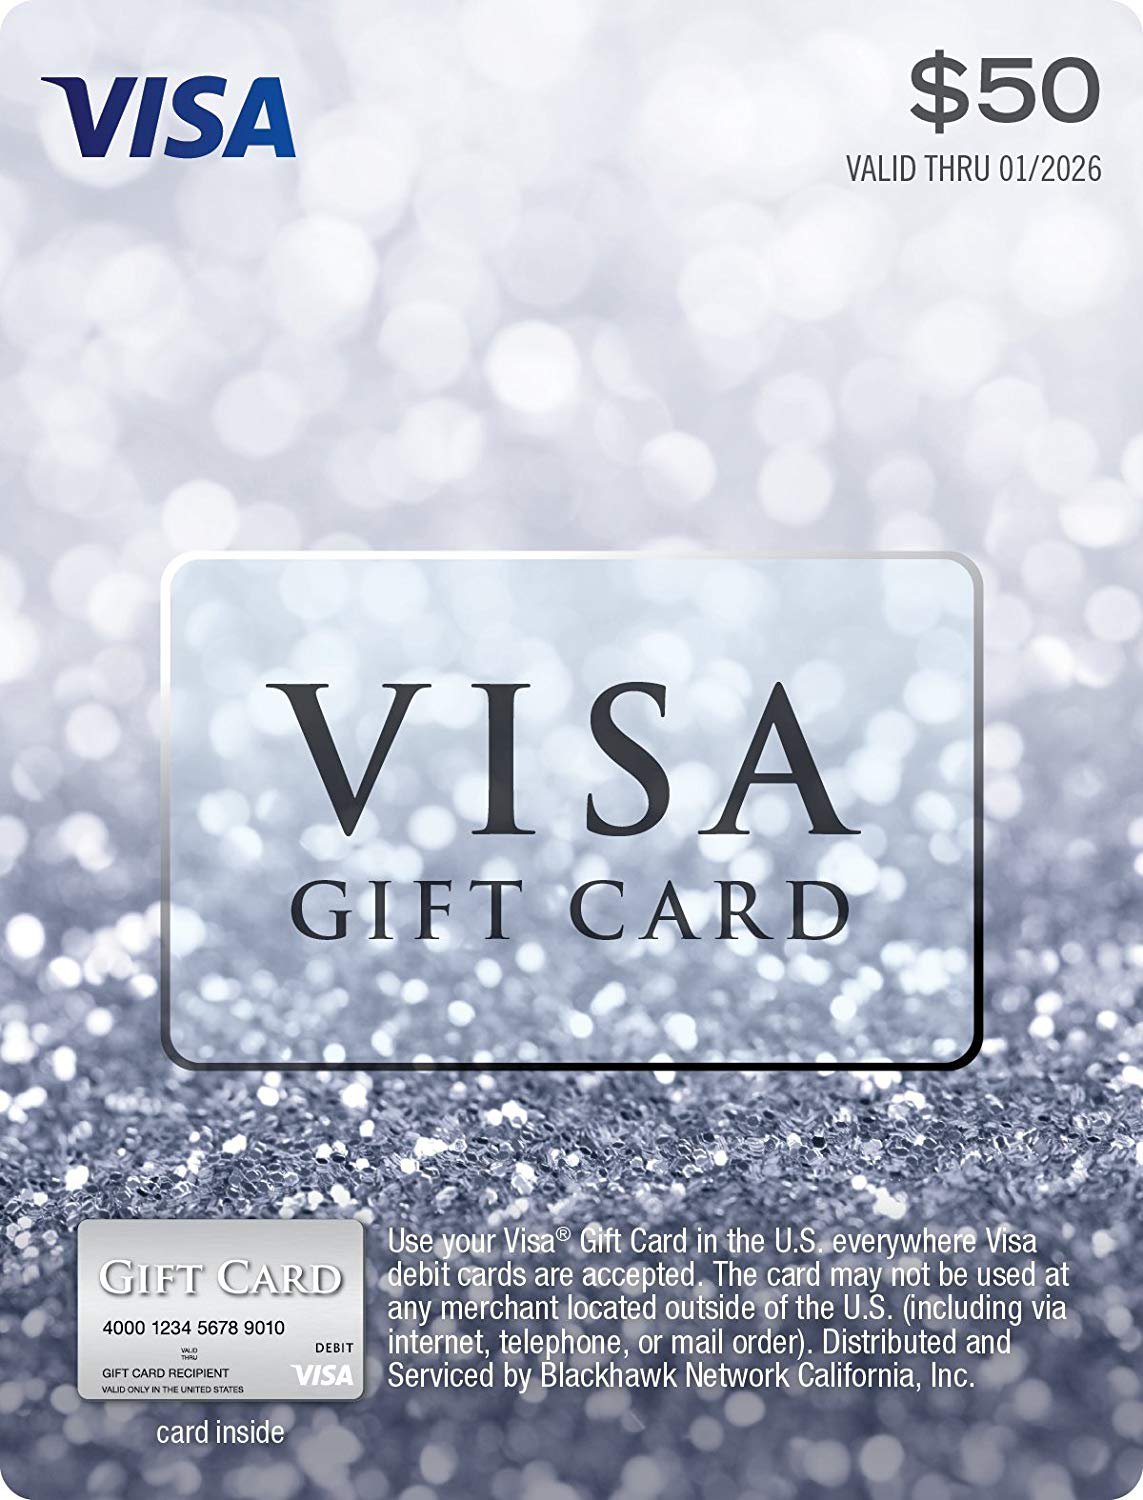 50 Visa Gift Card, Send FREE To Recipient w/ Message (Please Note